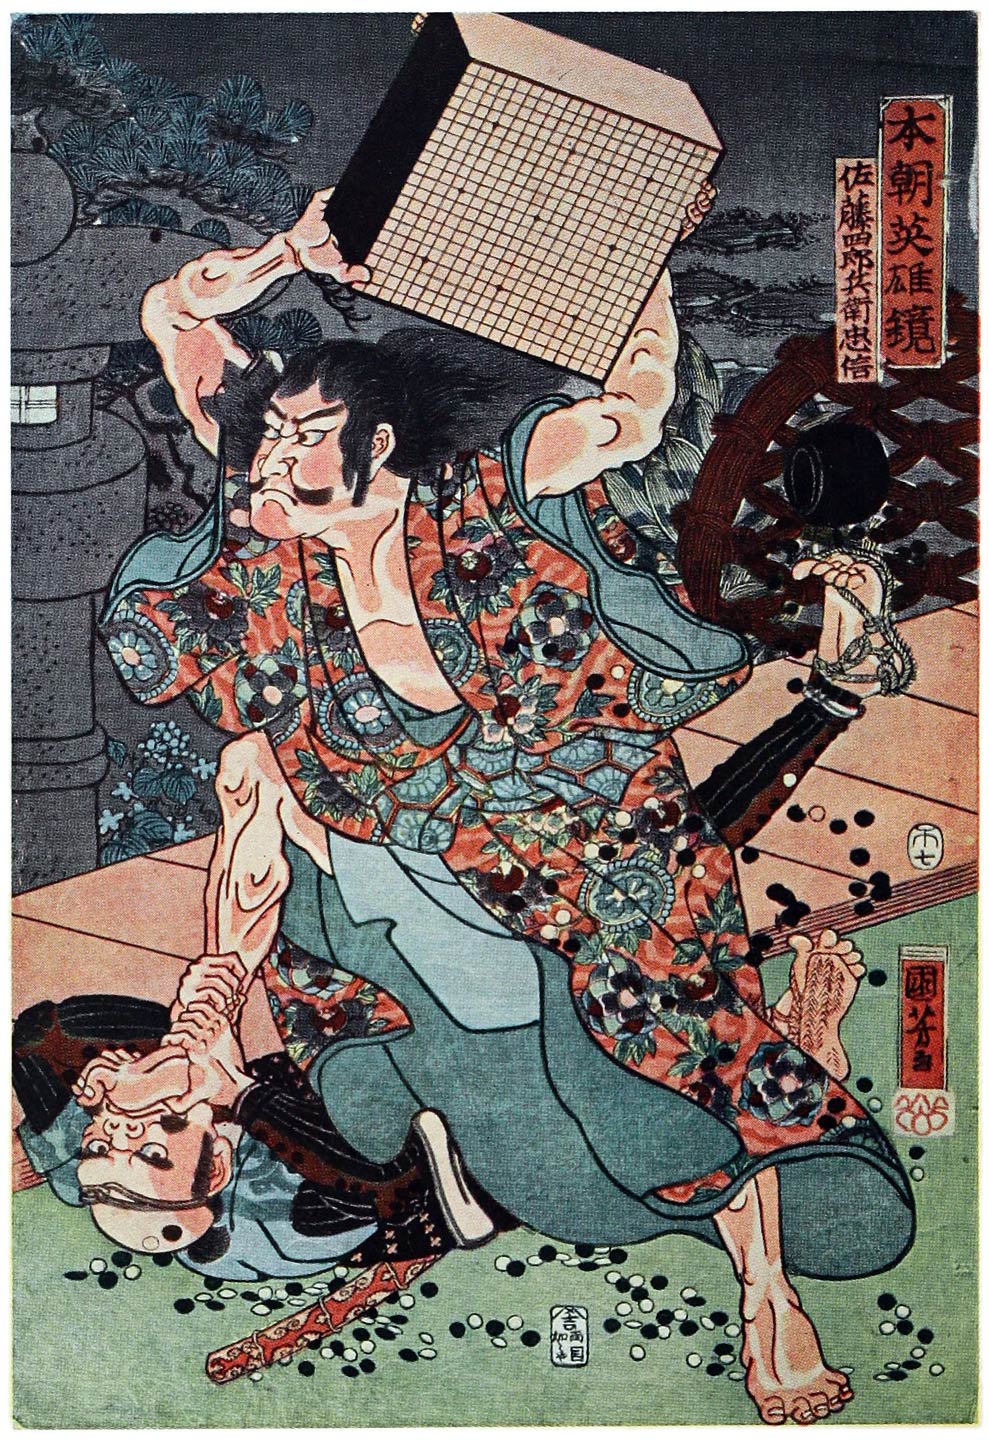 Sato Tadanobu, a Samurai of the Twelfth Century, Defending Himself with a “Goban,” when Attacked by His Enemies.